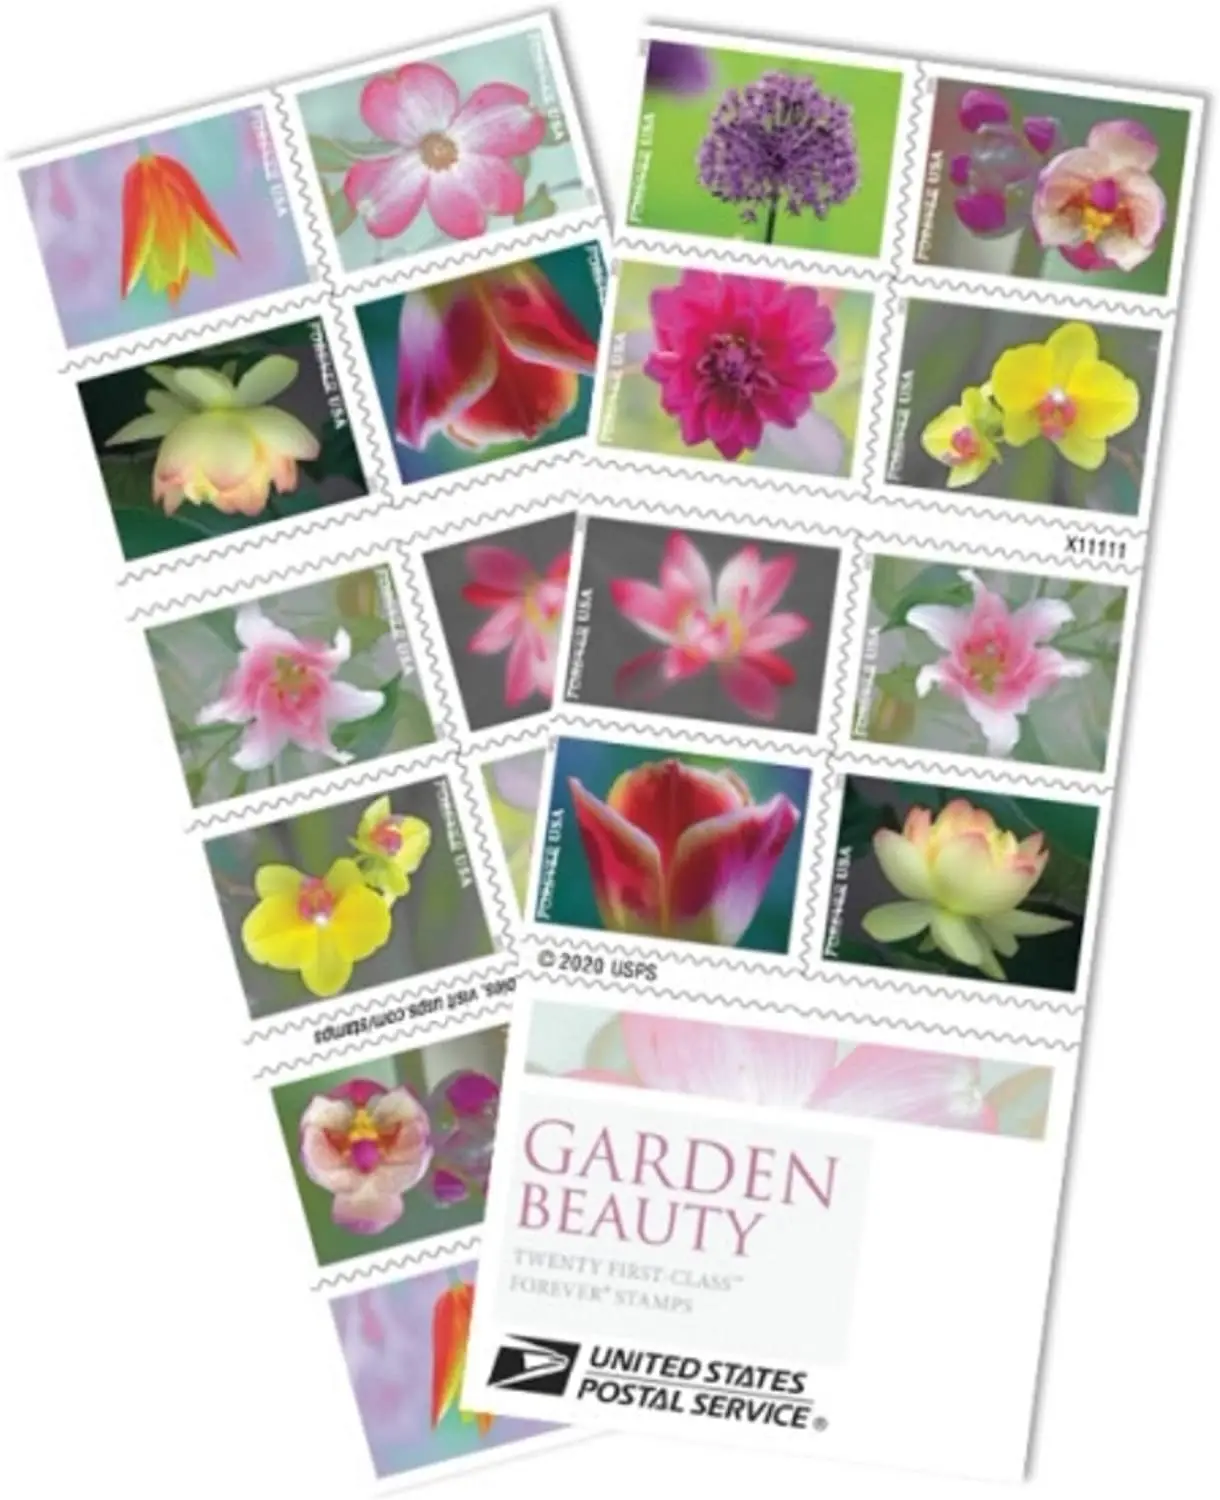 

Garden Beauty Forever Postage Stamps US Postal First Class Wedding Celebration Anniversary Flowers (5 Books of 100 Stamps)